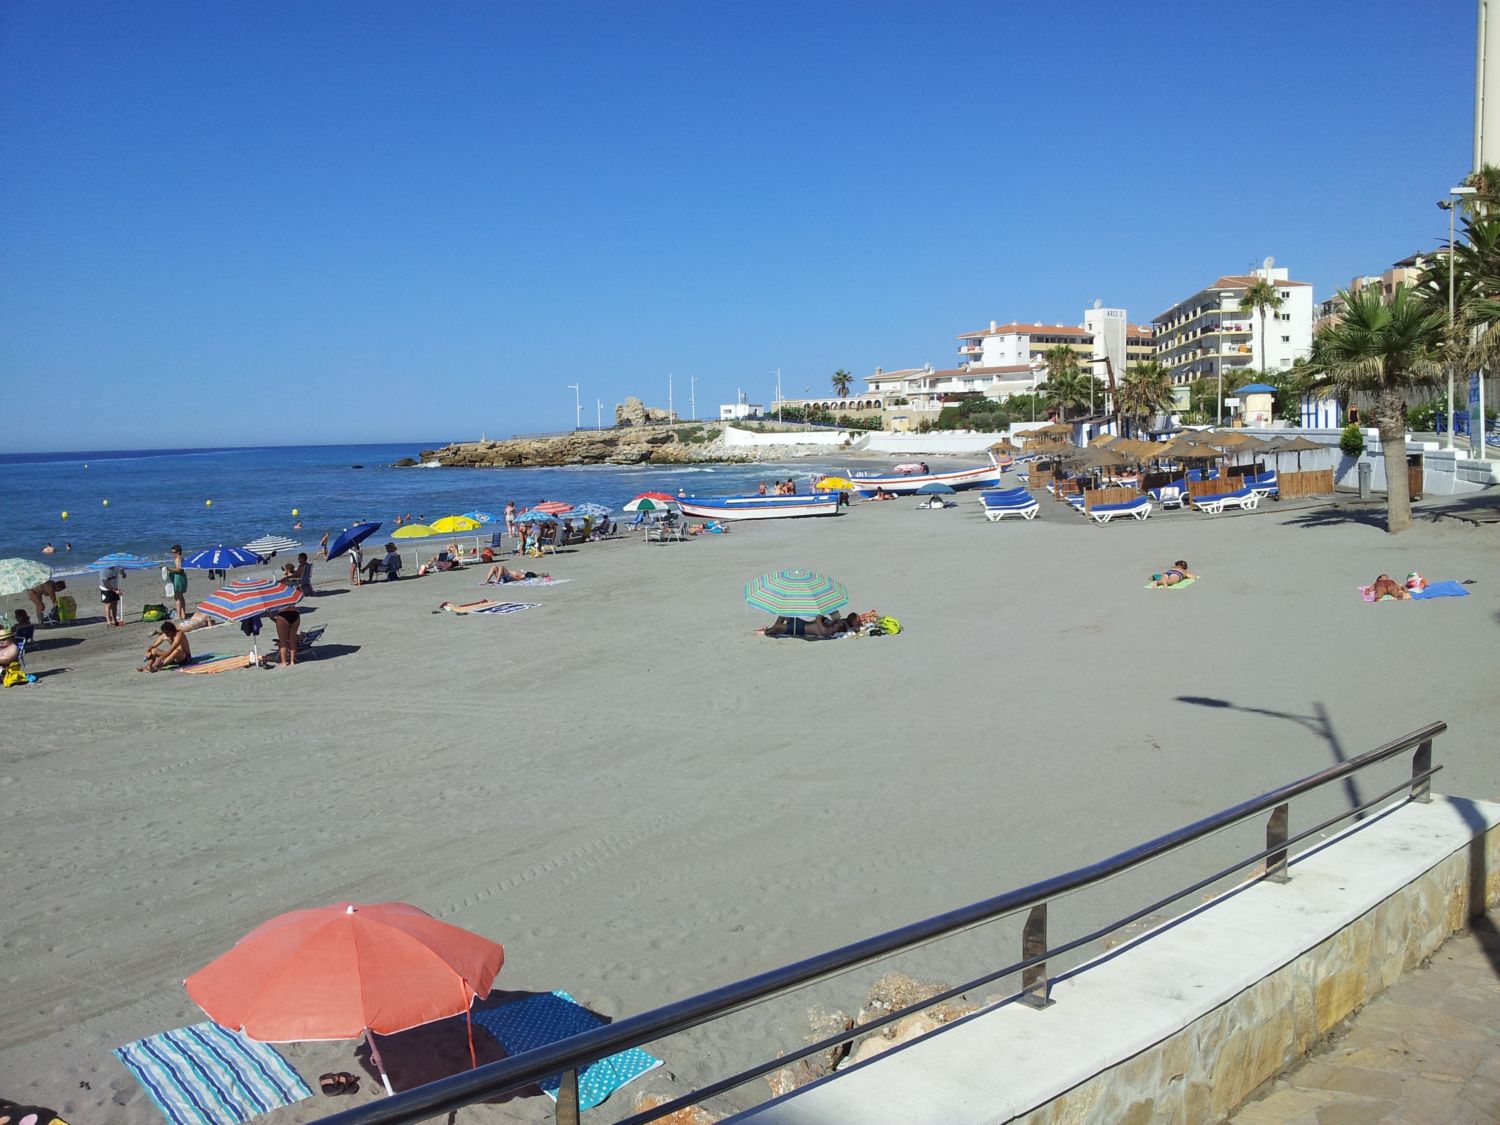 APARTMENT CAPACITY FOUR PEOPLE 40 METERS FROM THE TORRECILLAS BEACH